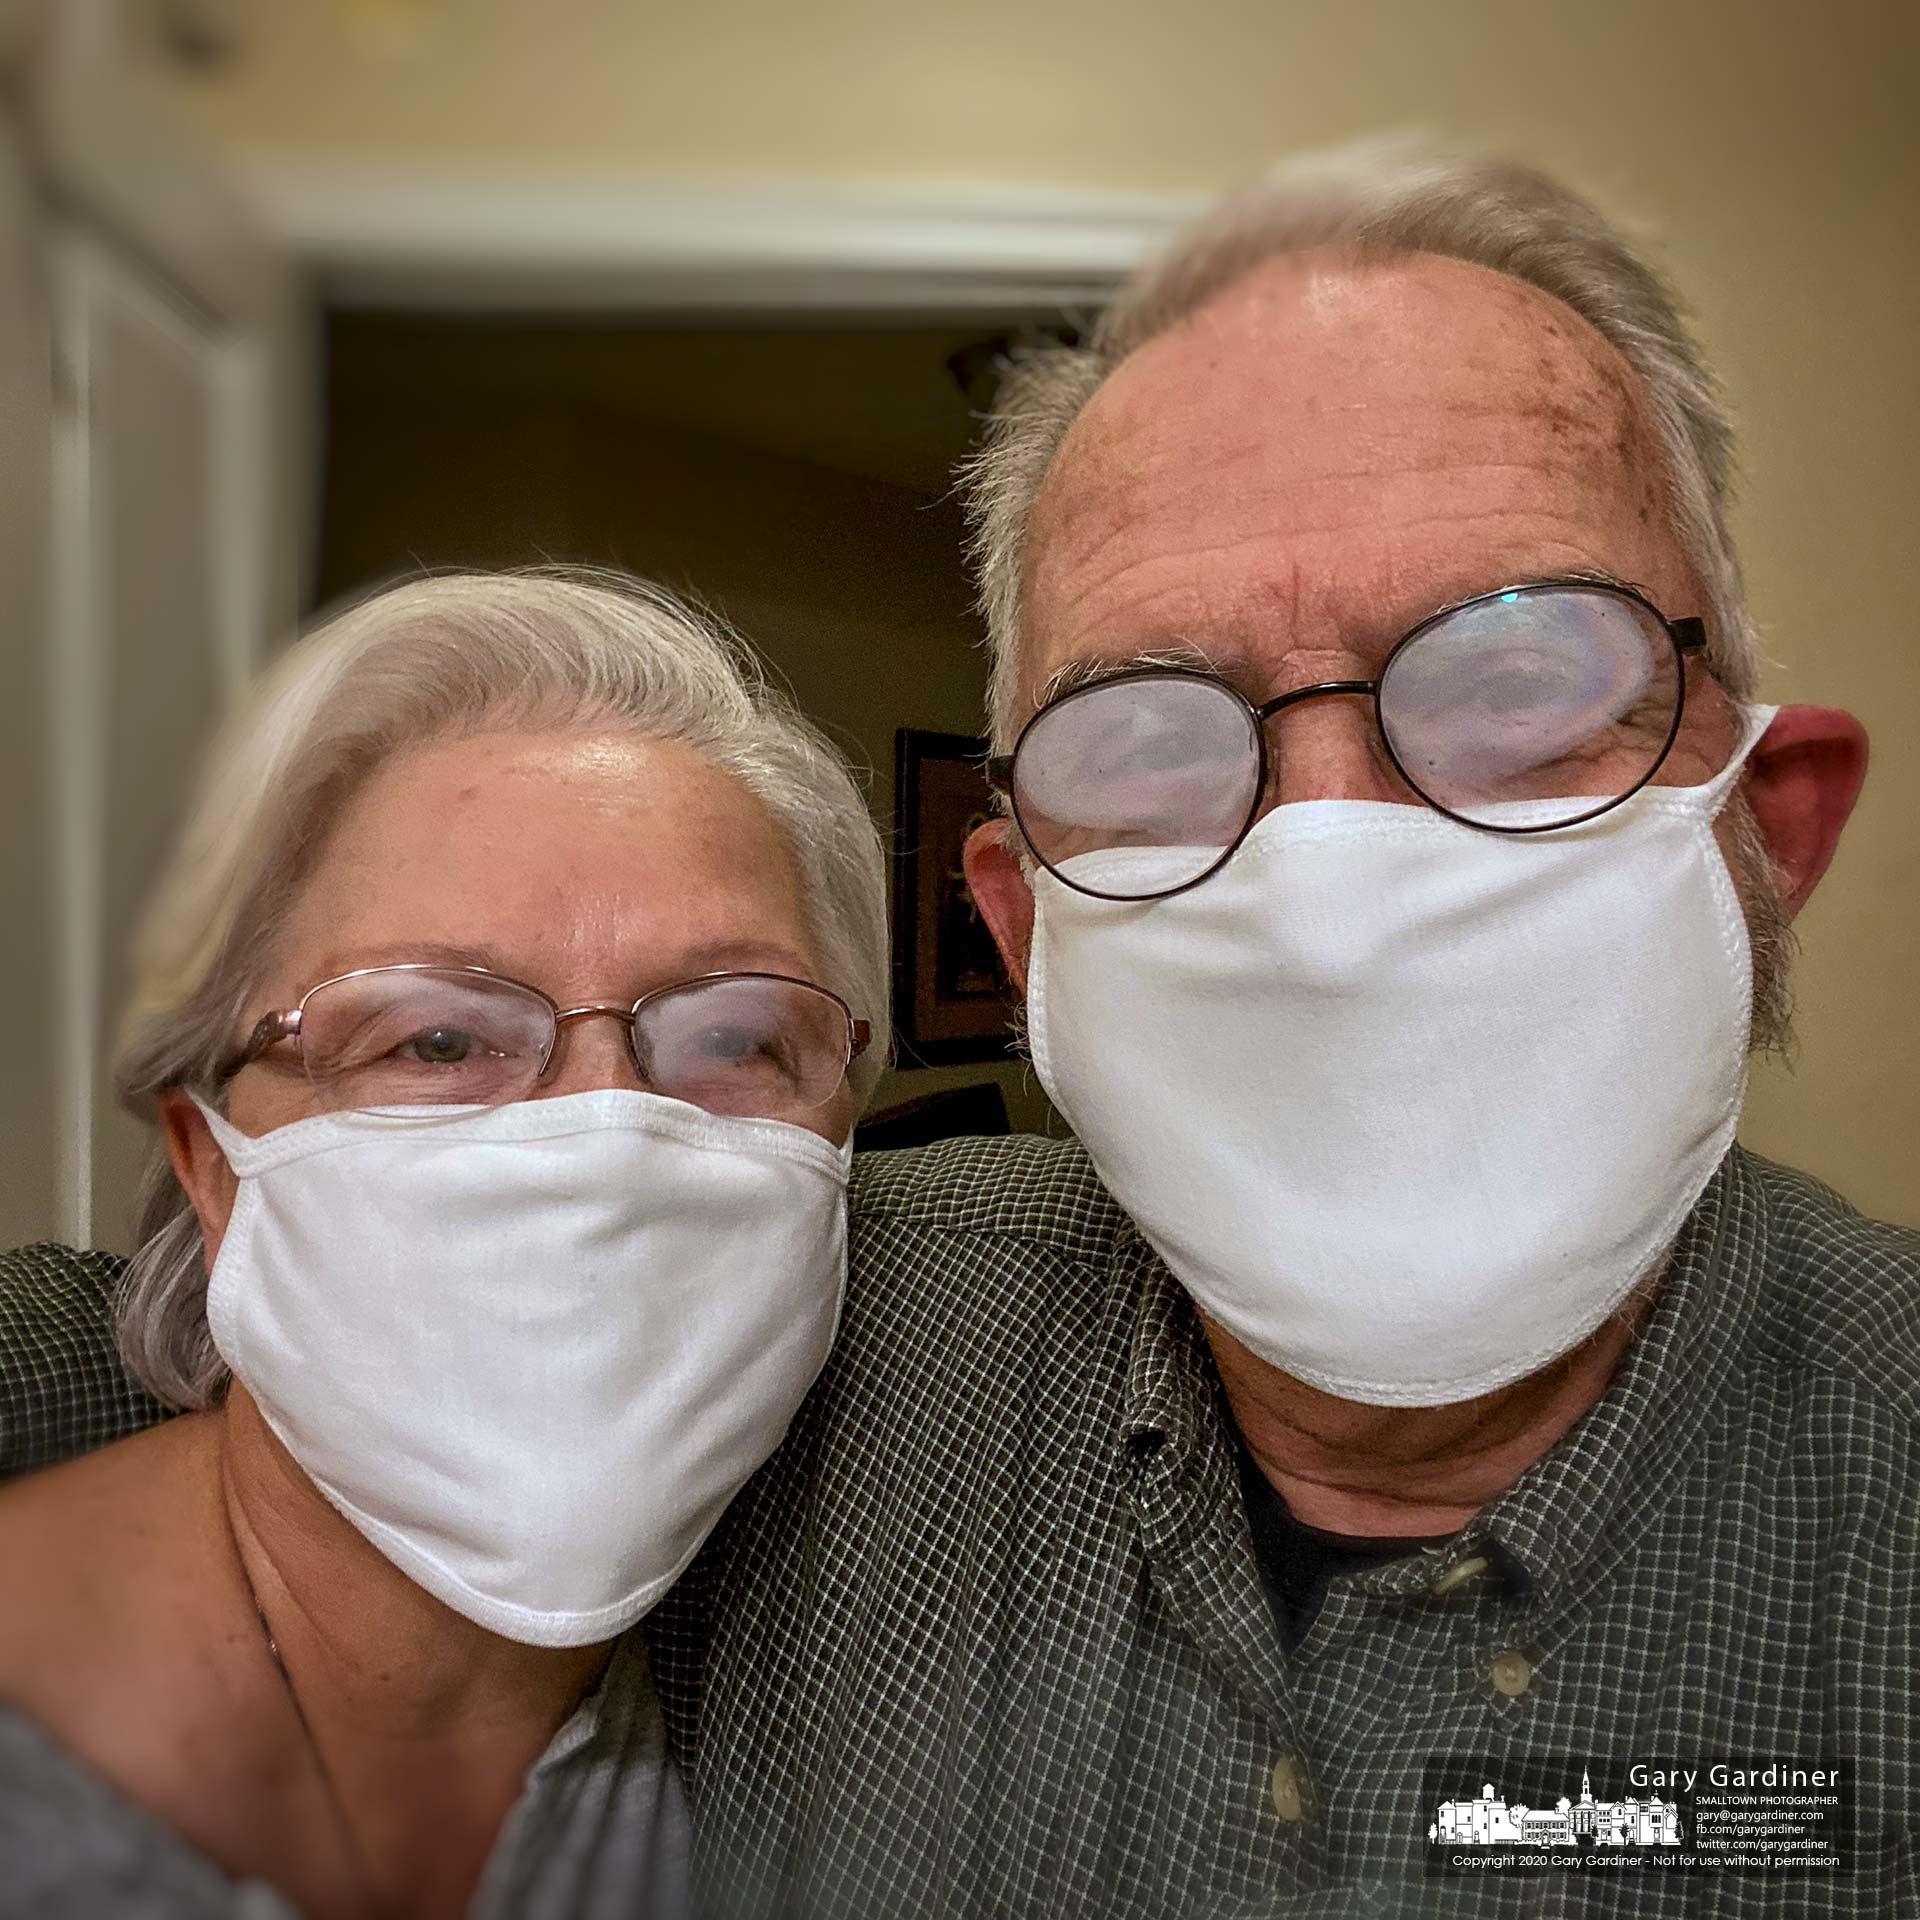 Sherry and Gary Gardiner wear their newly obtained cotton masks as minimum protection against spreading the COVID-19 virus although they spend most of their days at home. My Final Photo for April 5, 2020